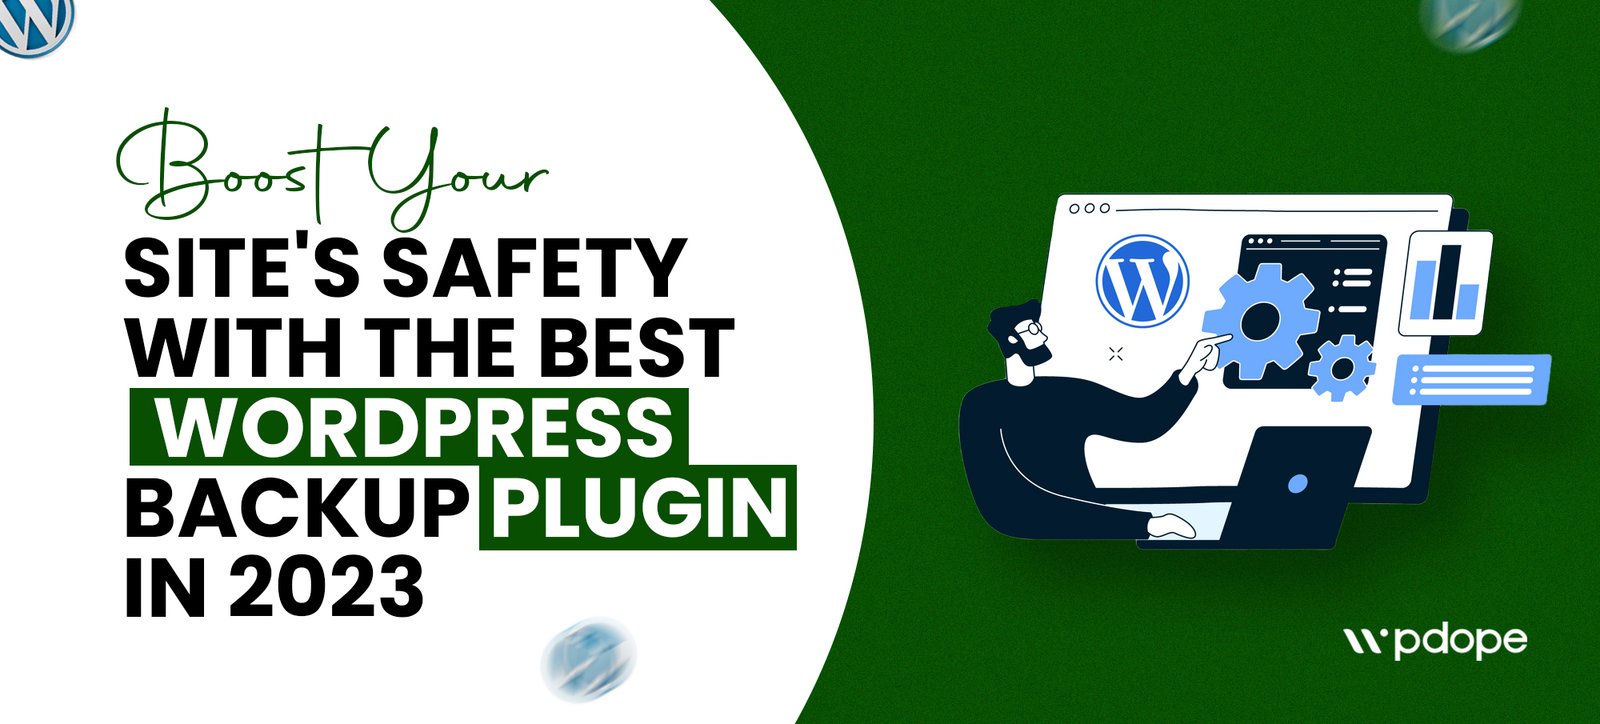 Boost Your Site’s Safety with the Best WordPress Backup Plugin in 2023